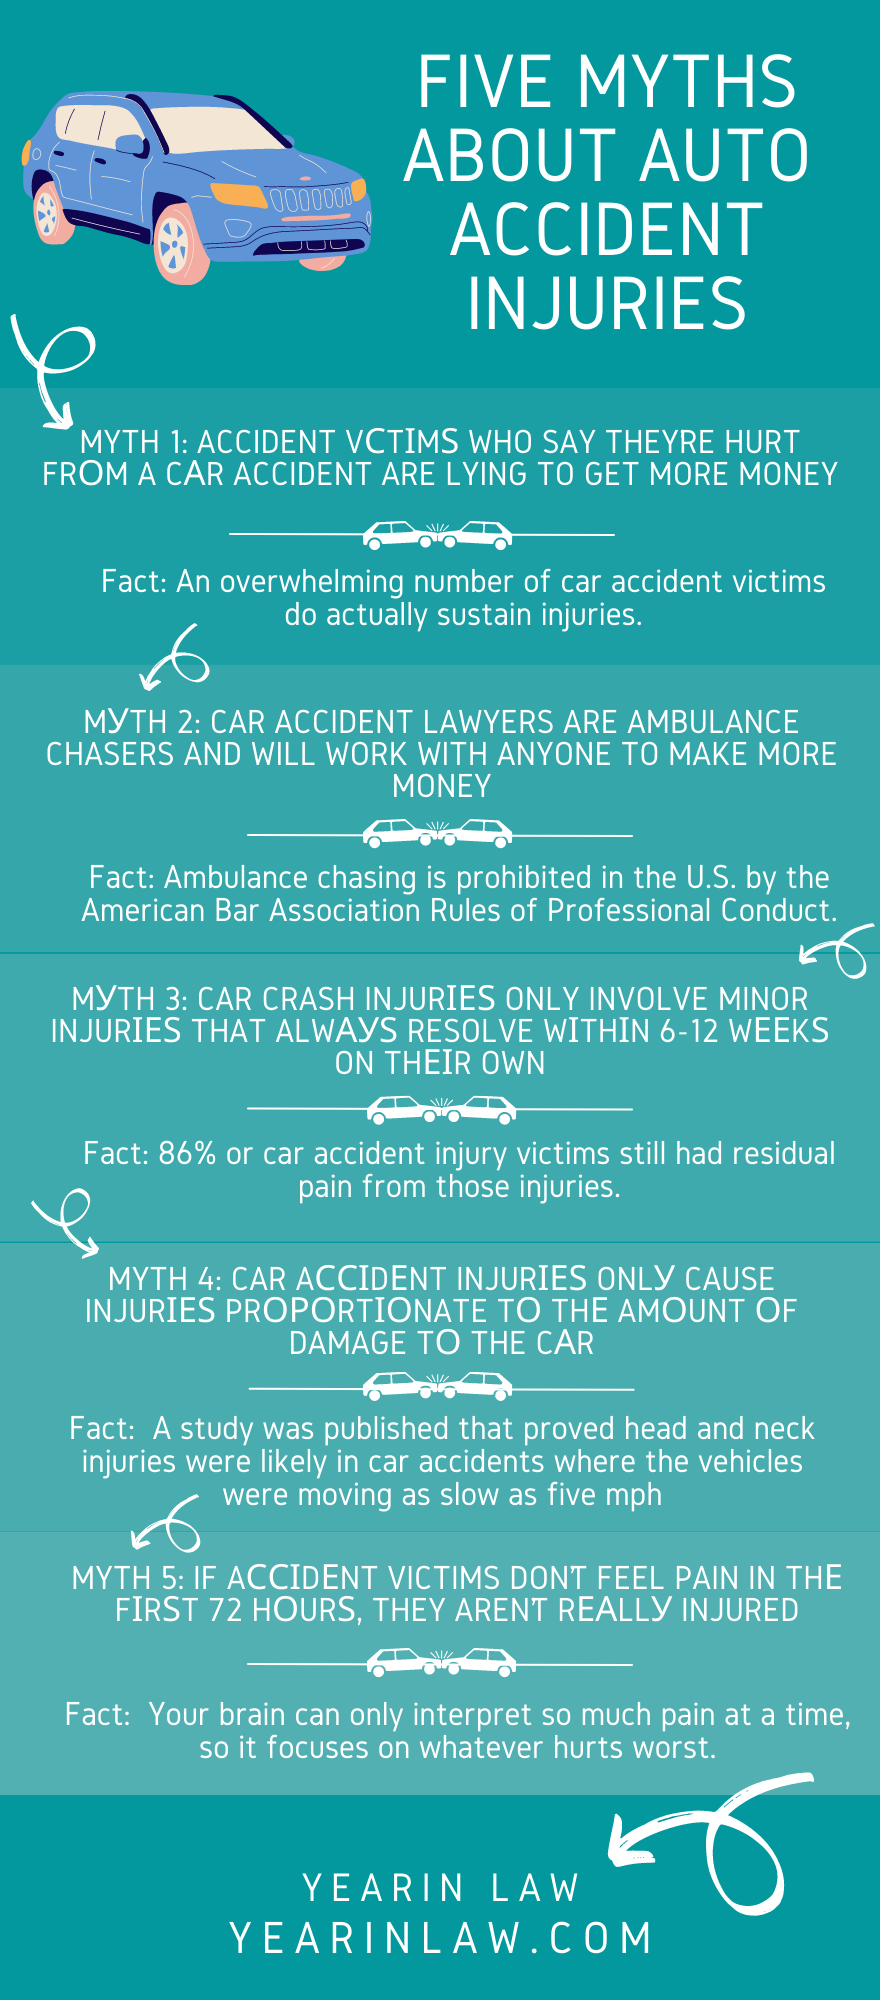 Five Myths About Auto Accident Injuries Infographic